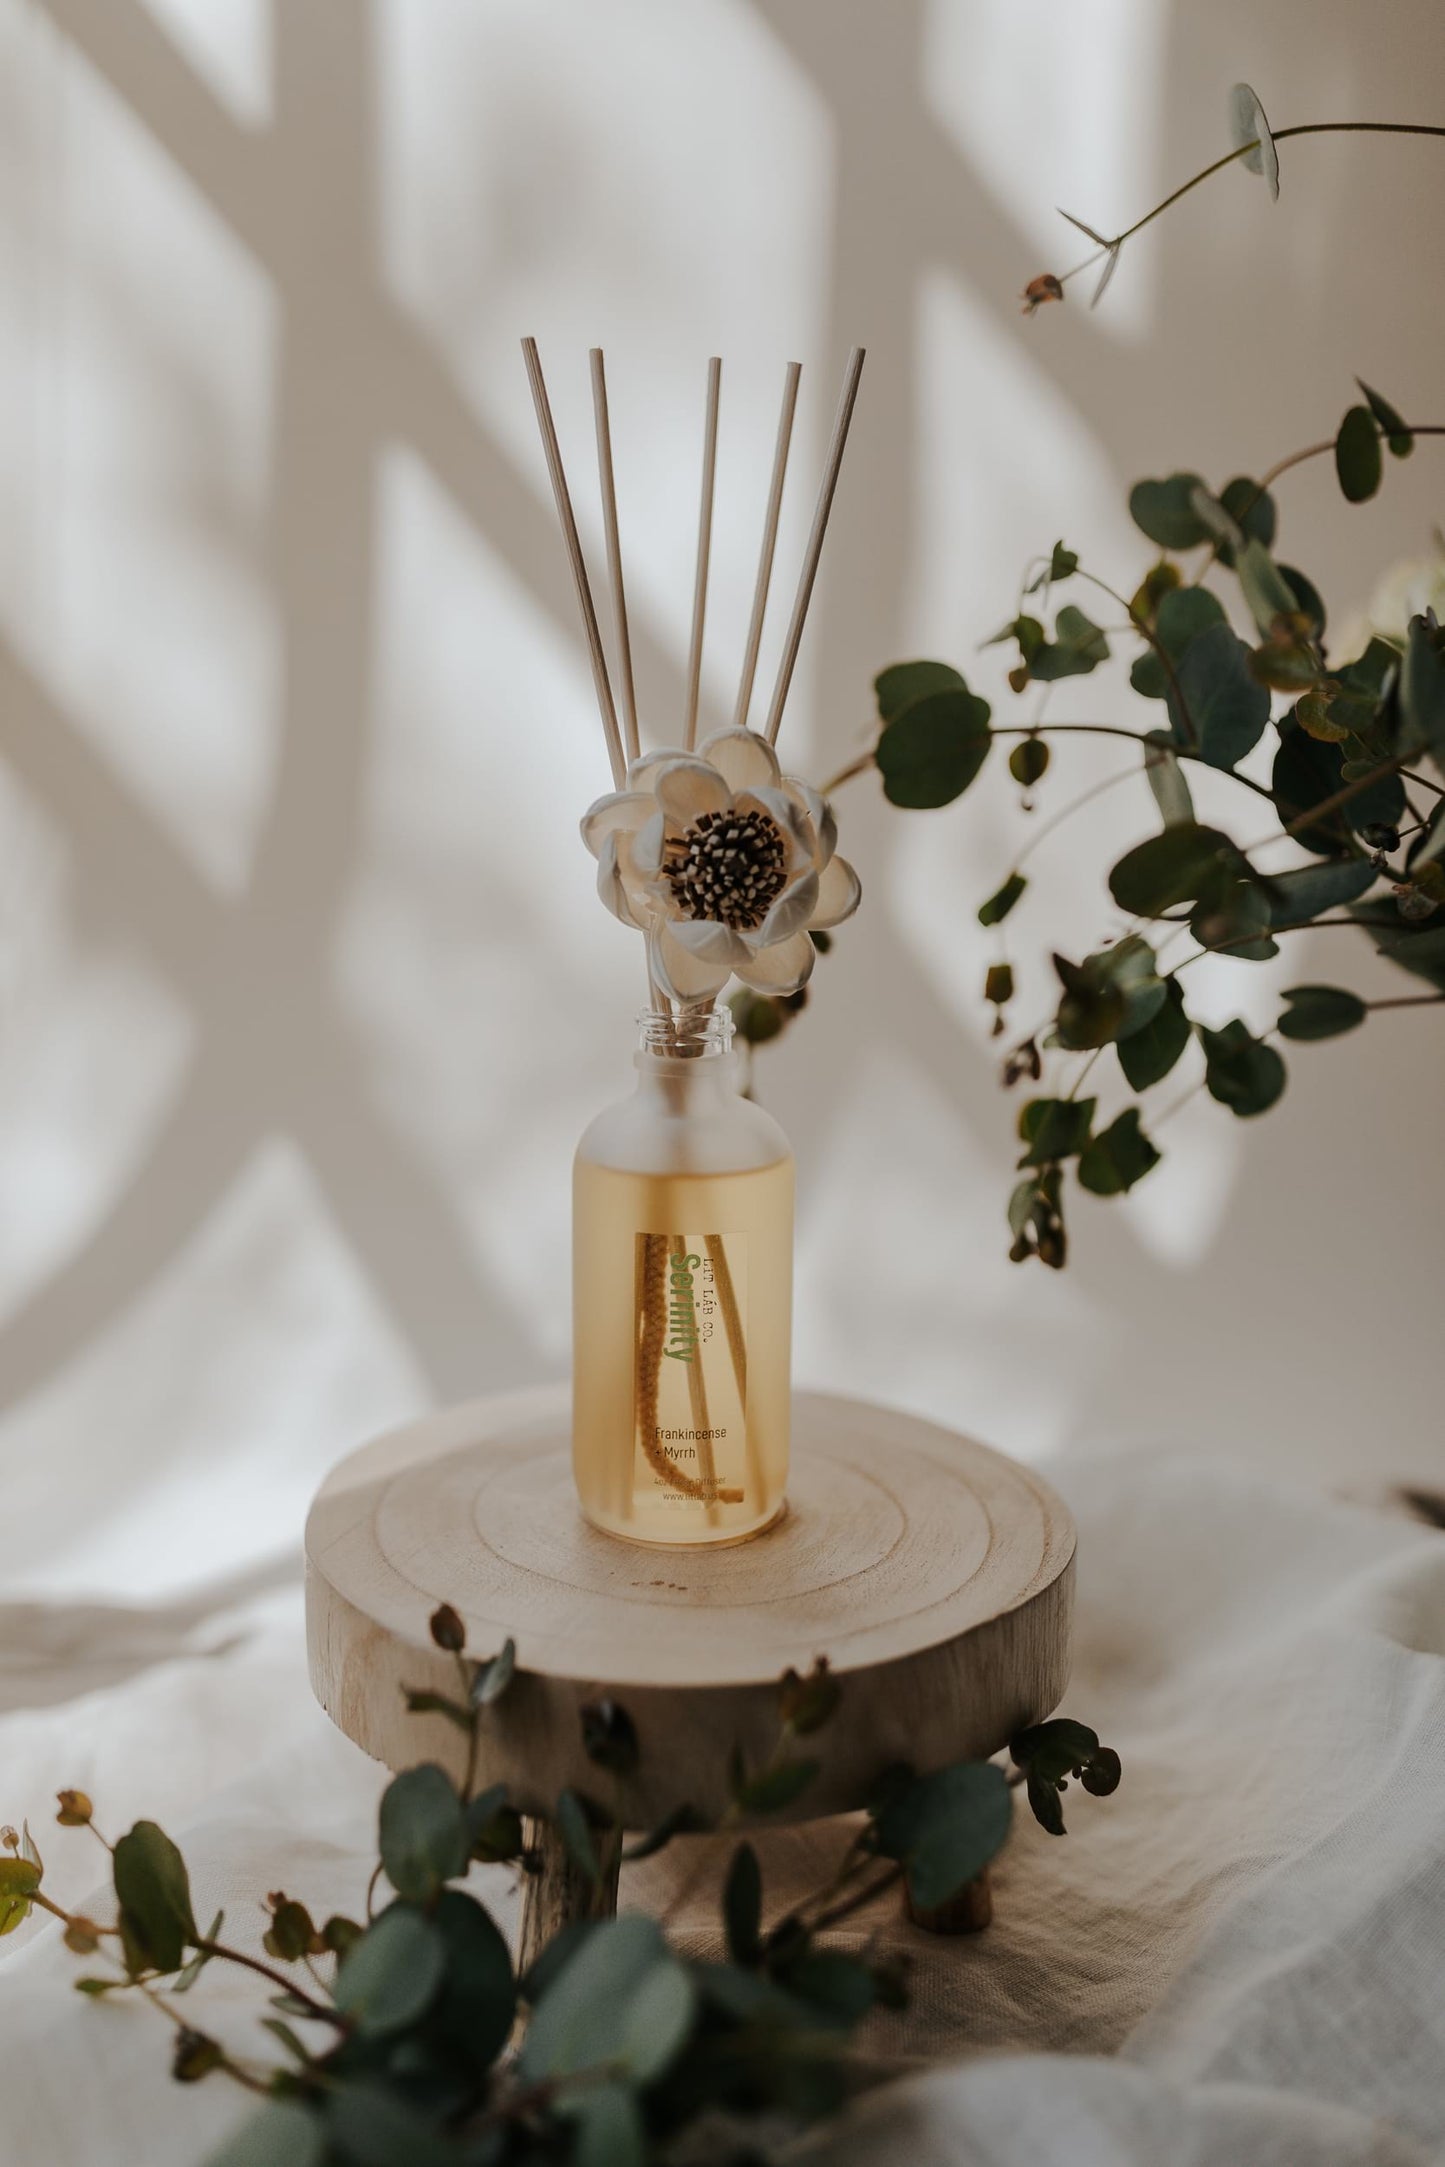 Serenity Floral Diffuser